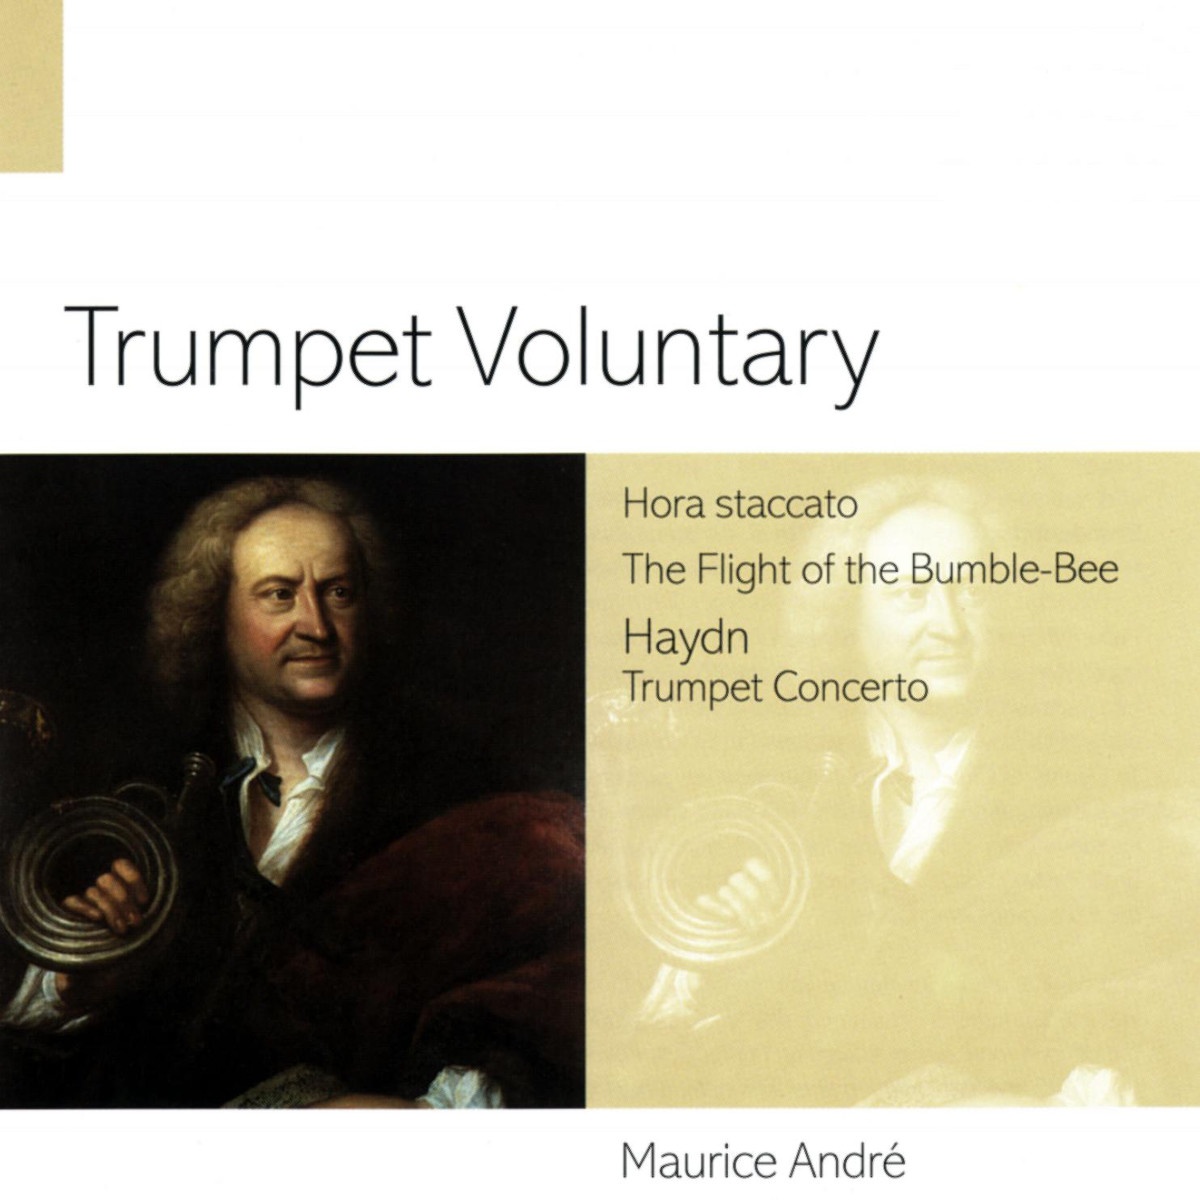 Suite in D: Round-O: The Prince of Denmark's March (Trumpet Voluntary) (arr. Defaye)